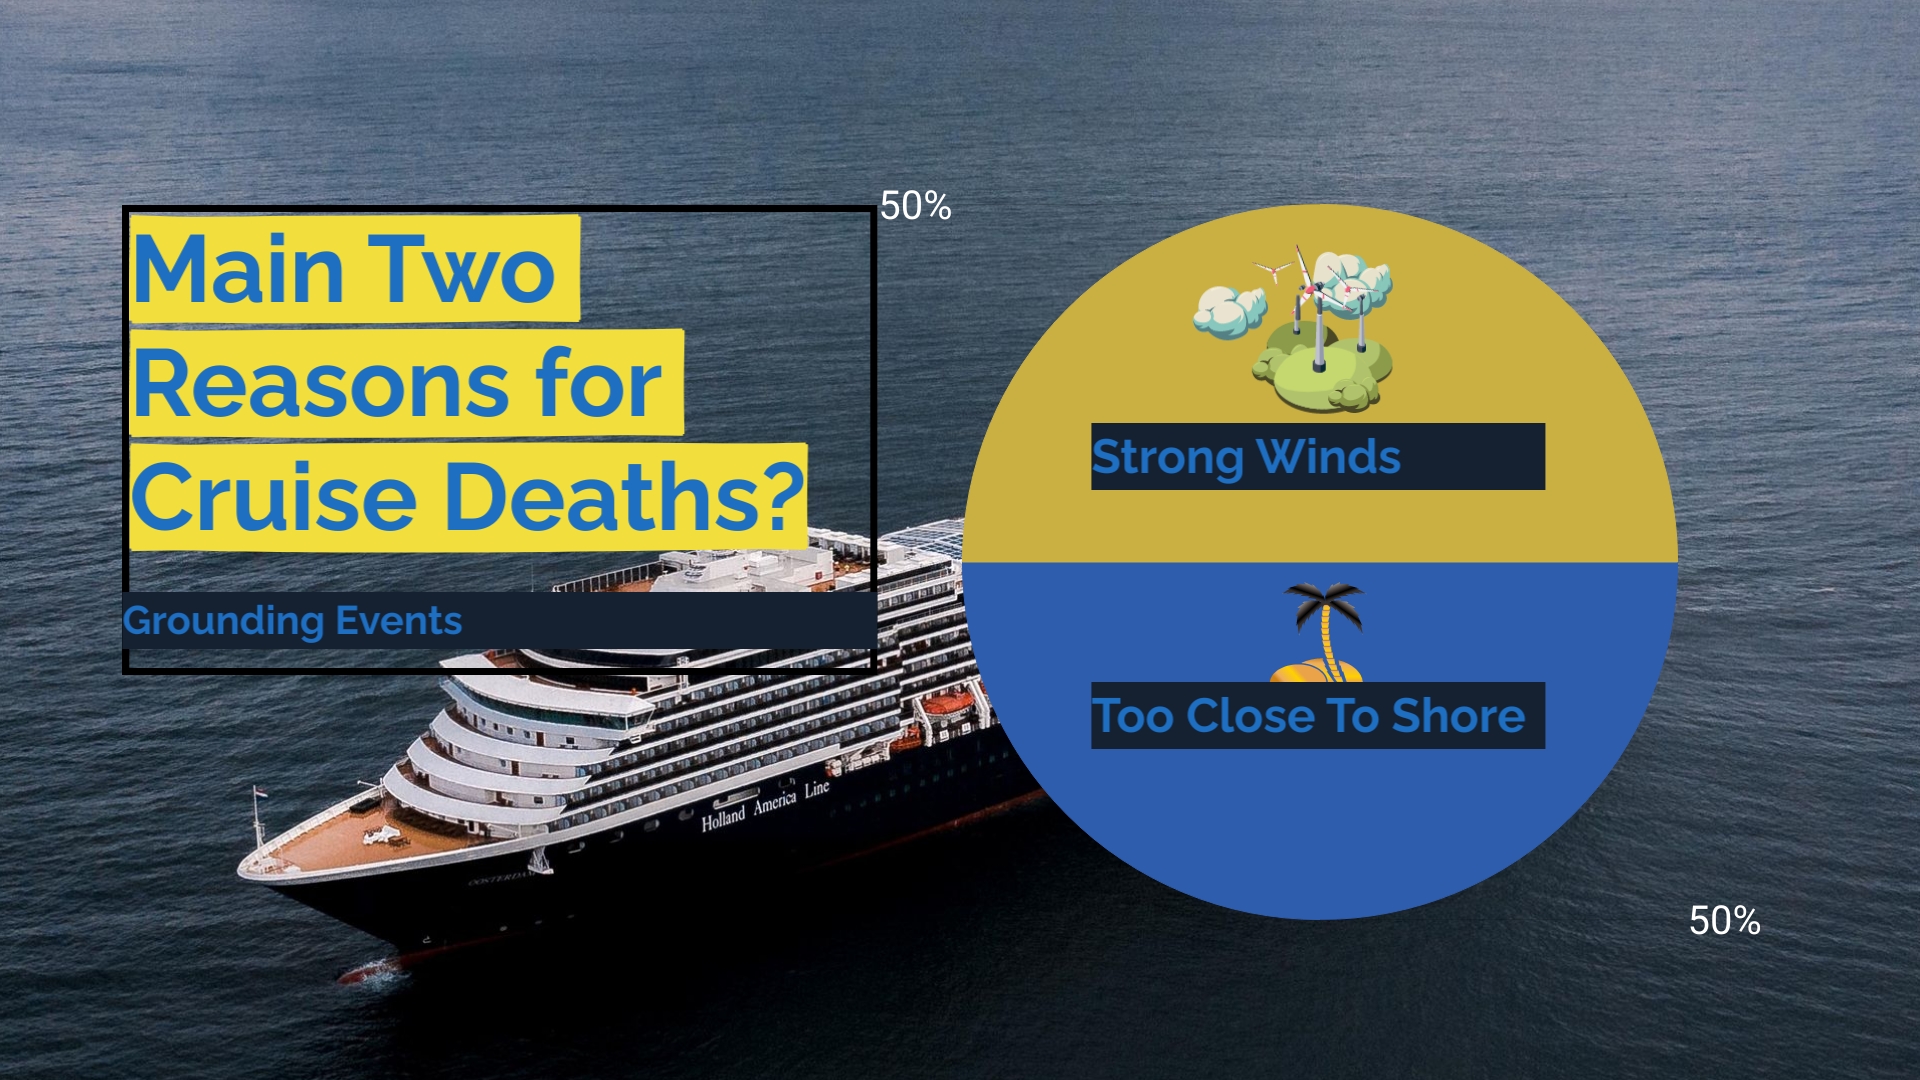 Main Two Reasons for Cruise Deaths?